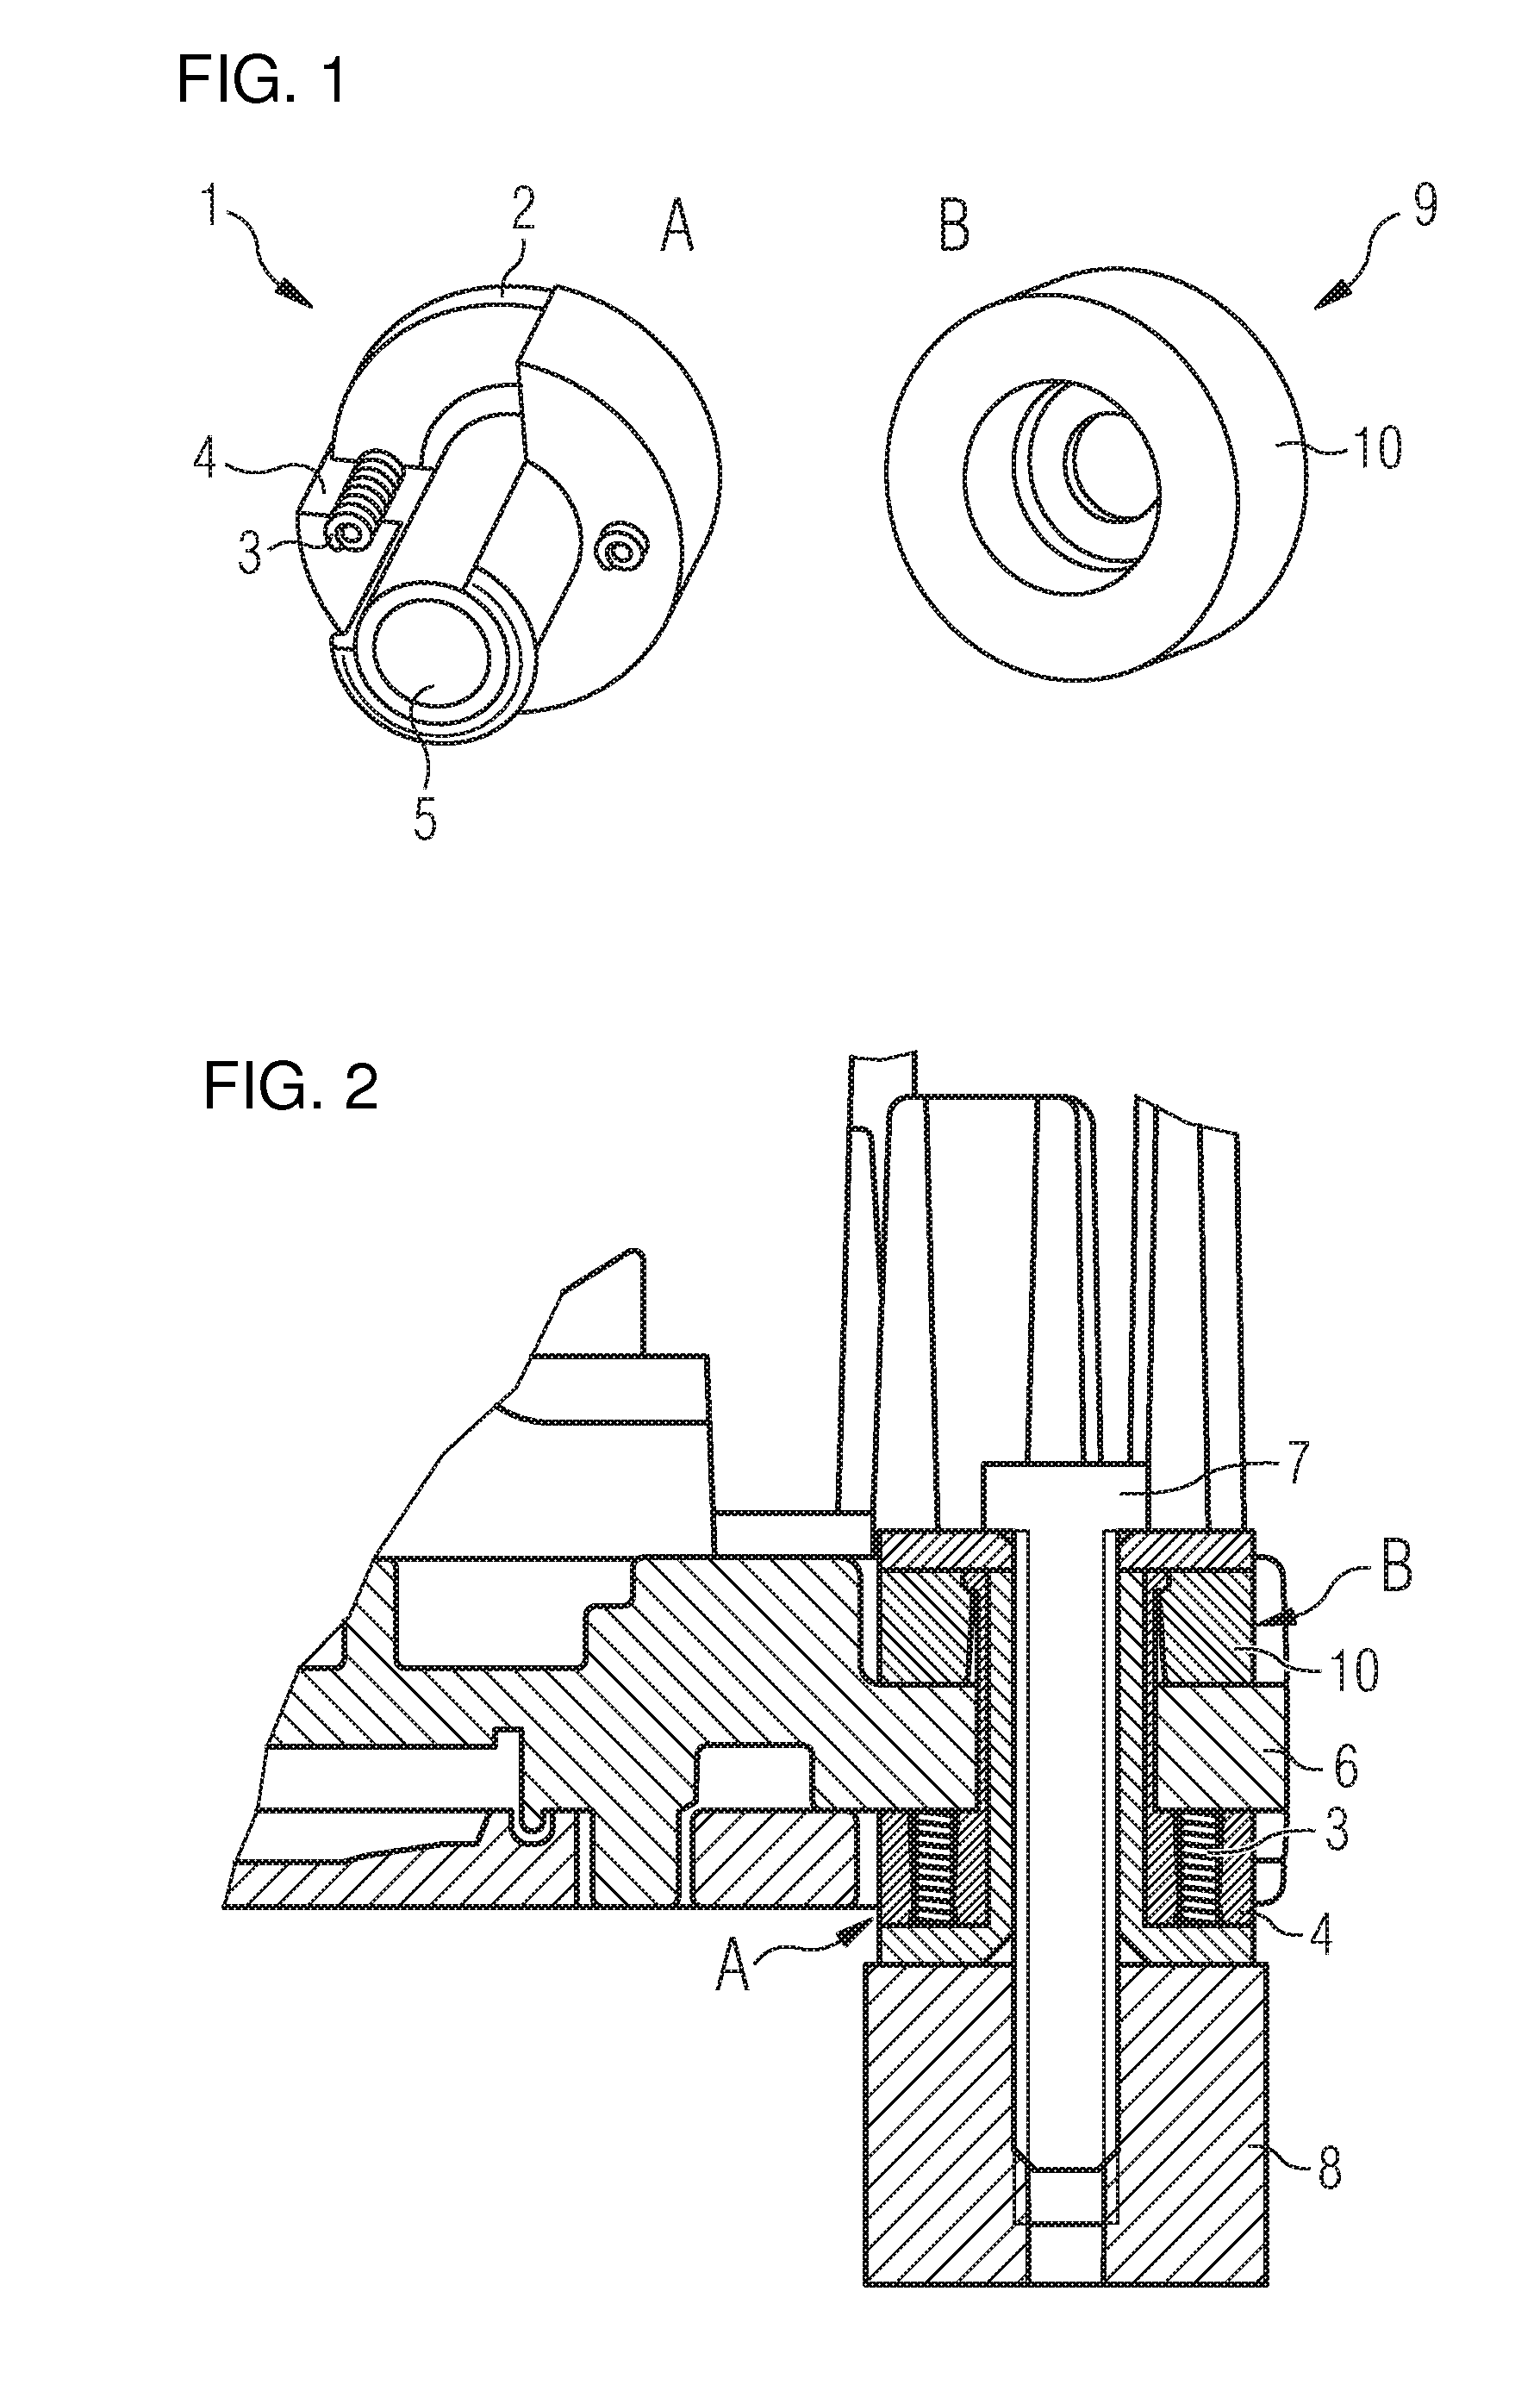 Ground connection comprising a vibrational damper for electronic devices